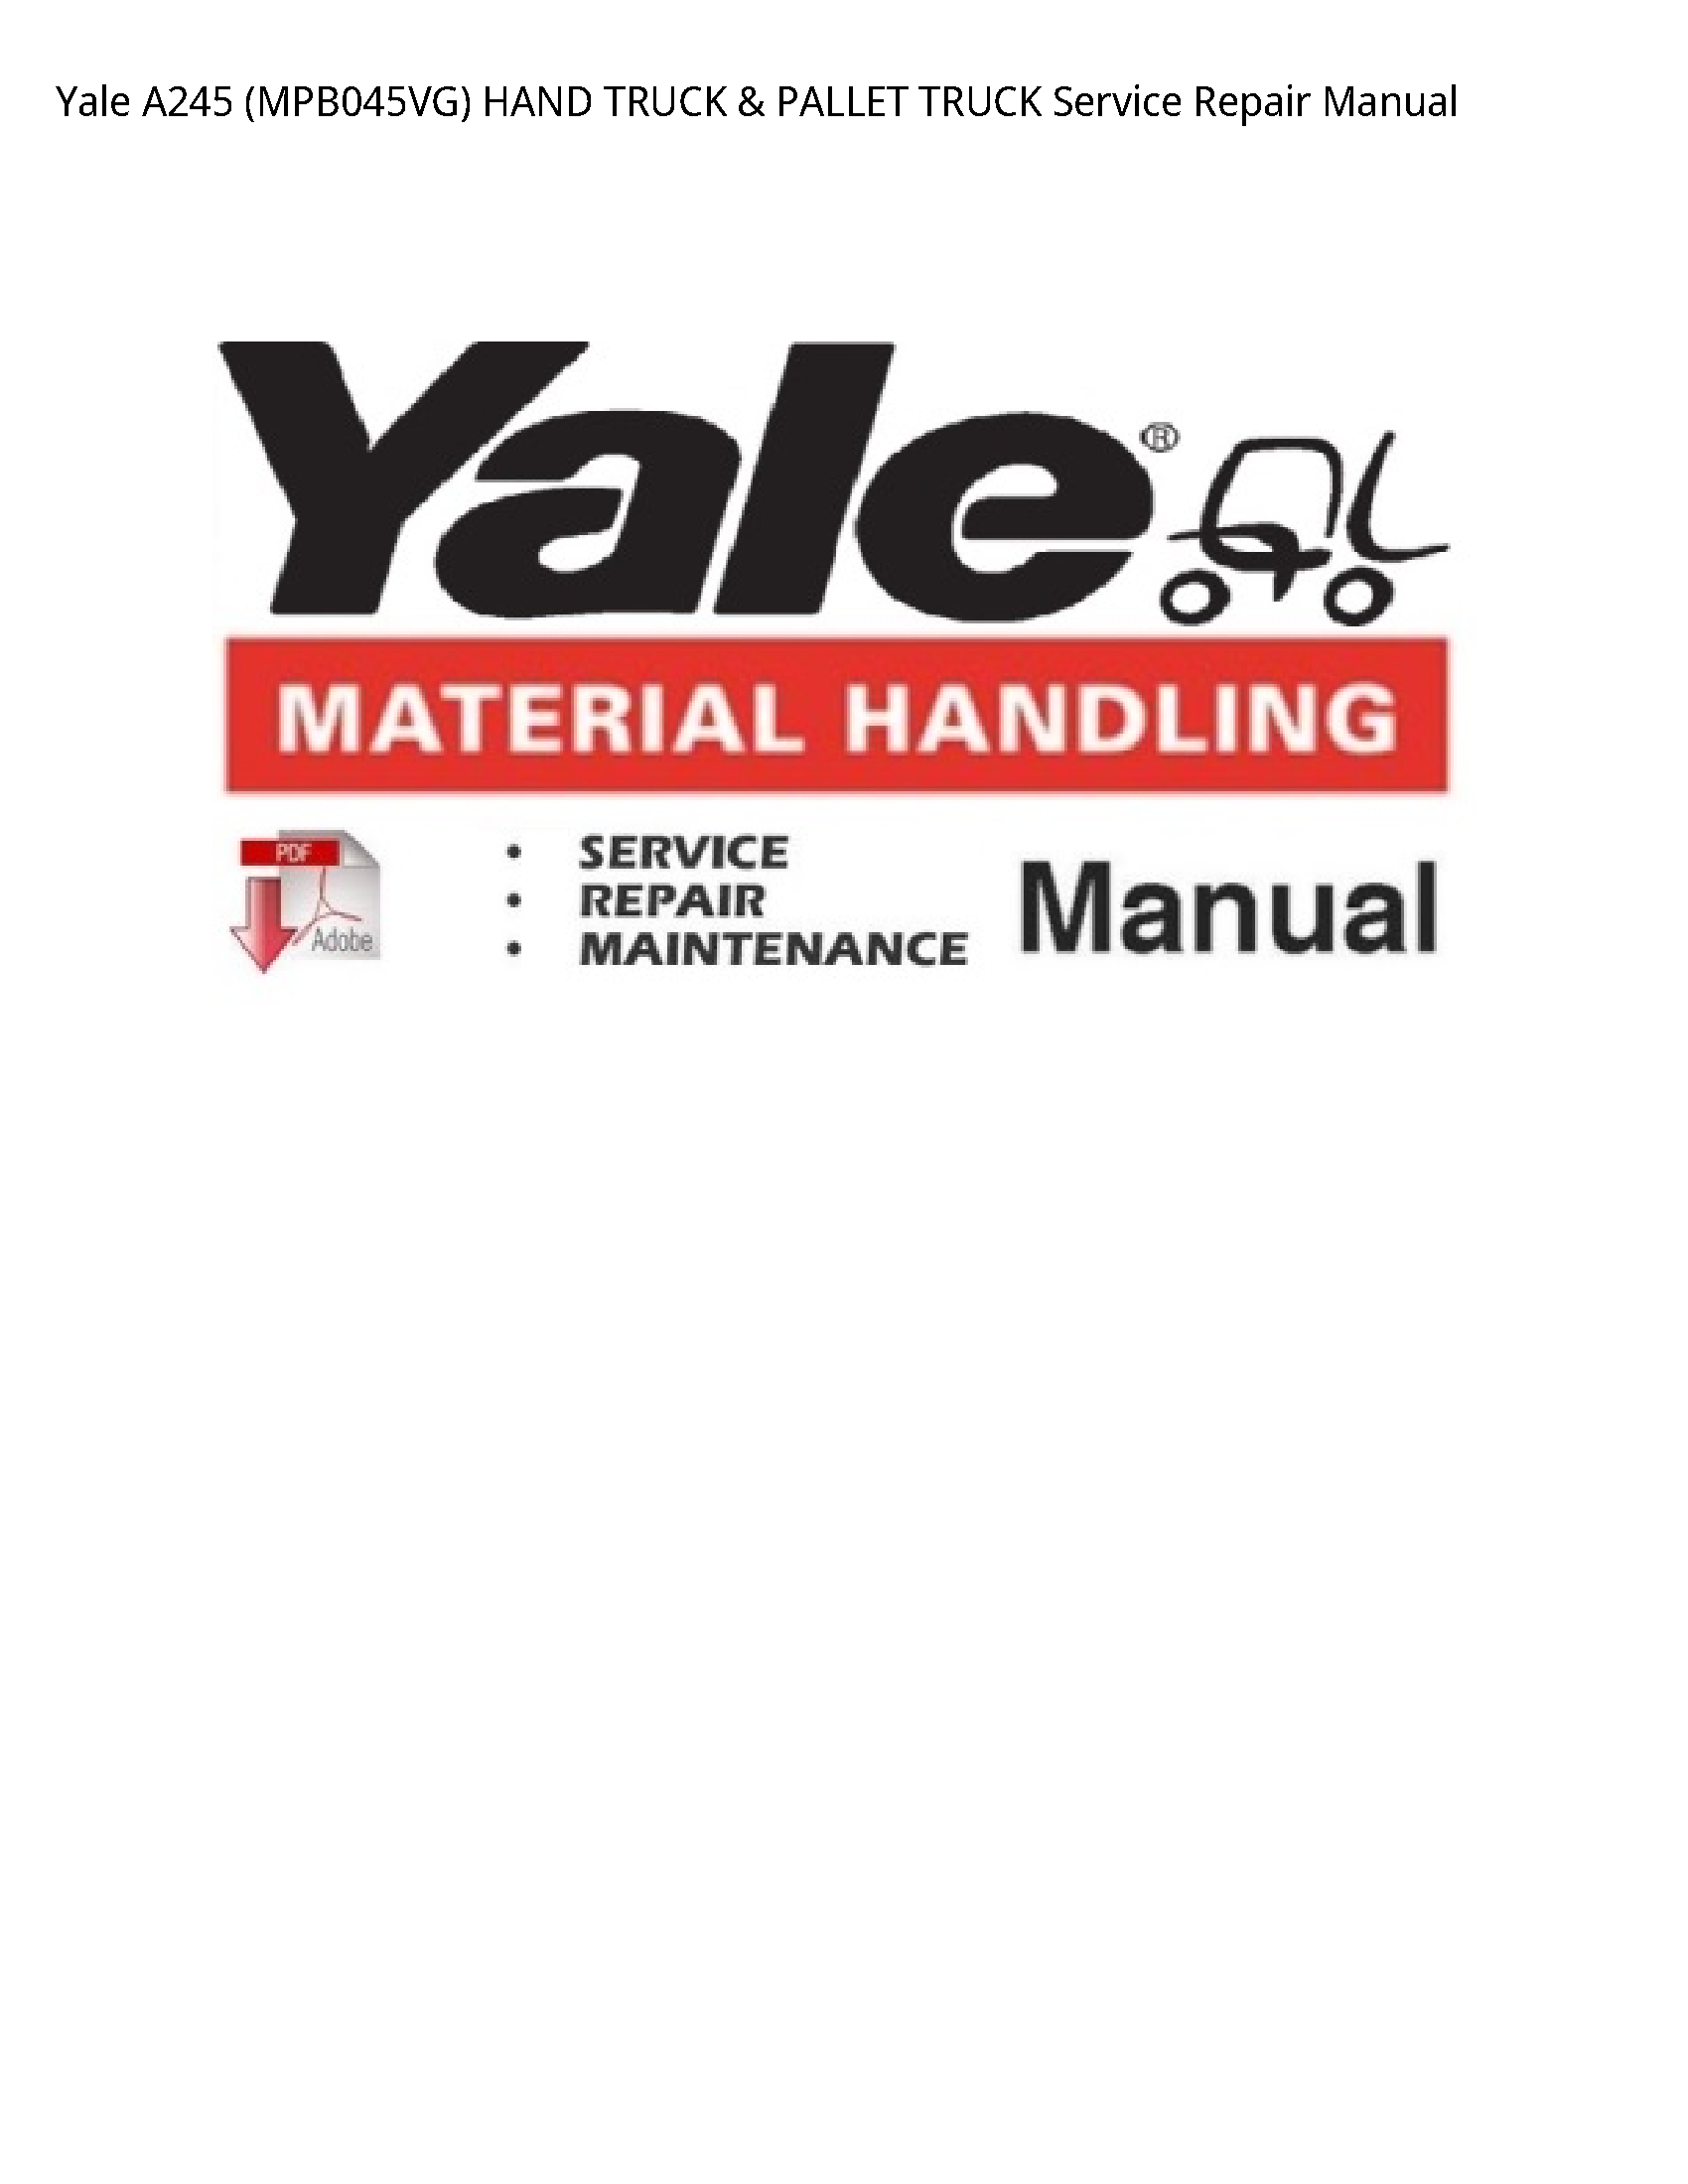 Yale A245 HAND TRUCK PALLET TRUCK manual